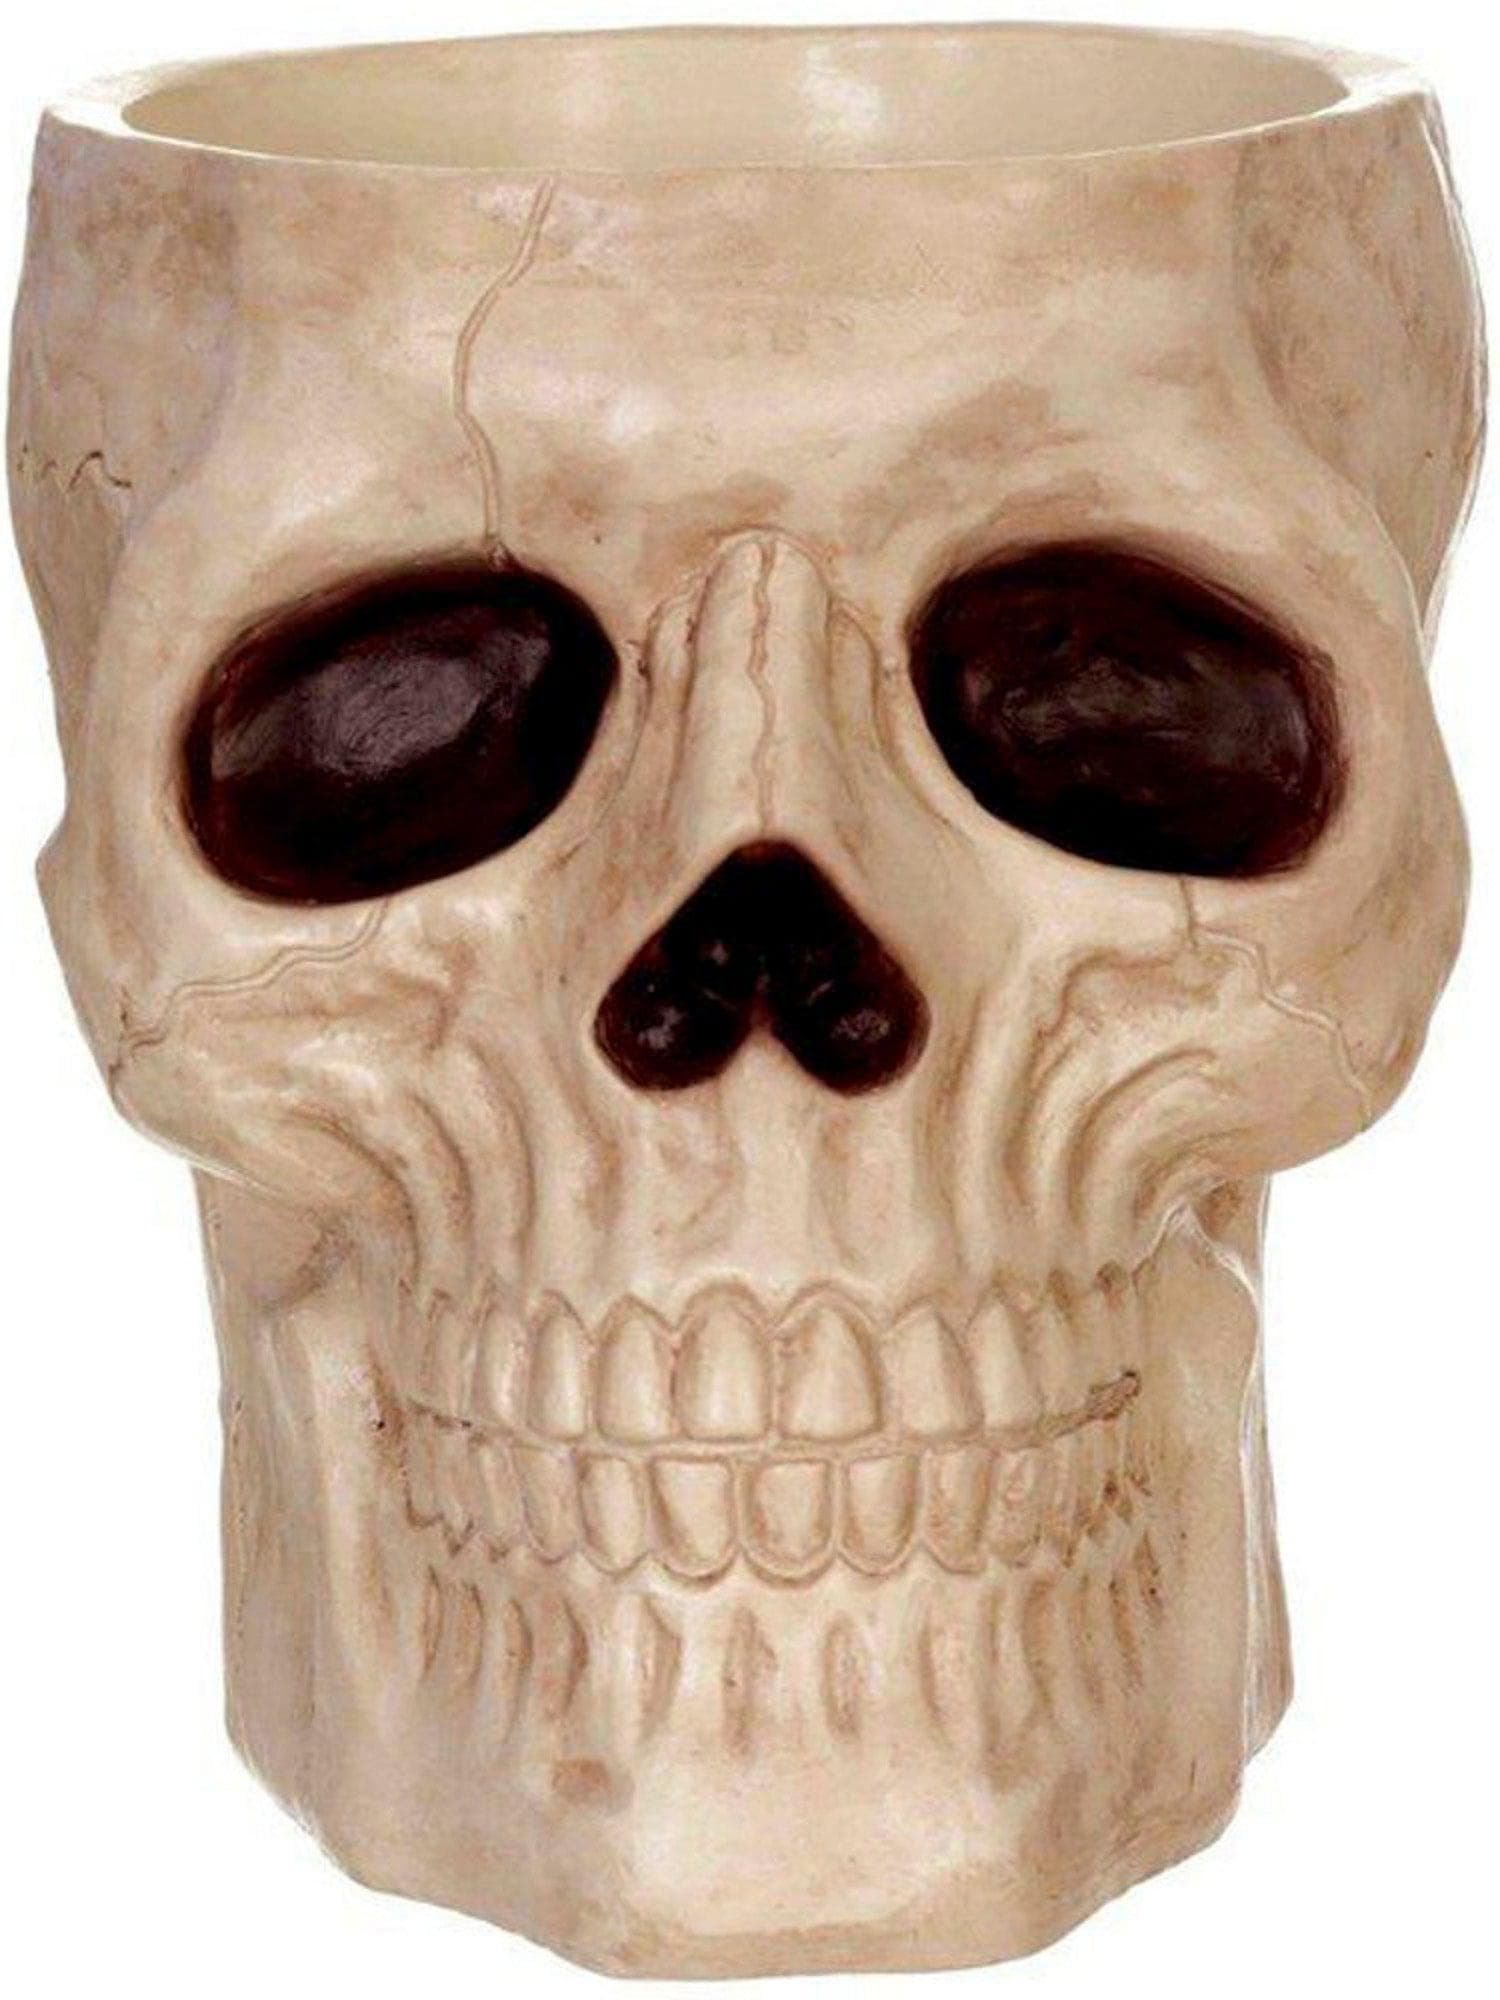 8-inch Skull Candy Bowl - costumes.com